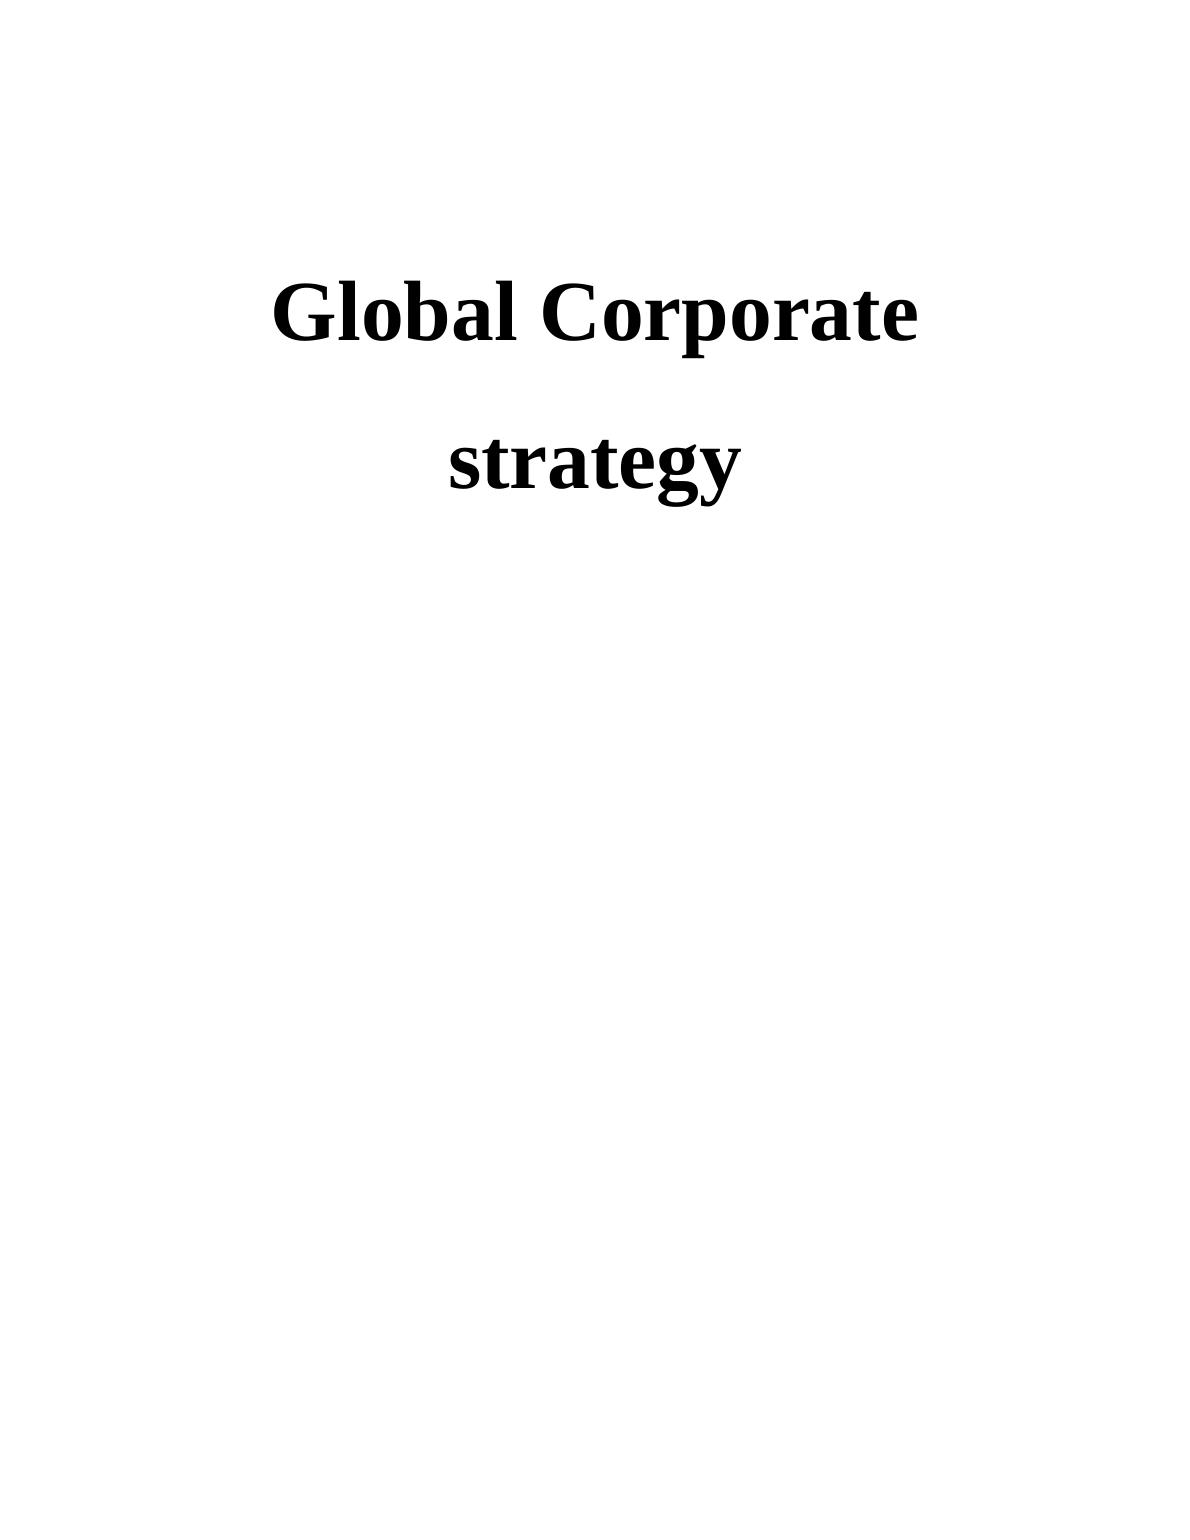 Global Corporate Strategy Assignment - TATA steel manufacturing company_1